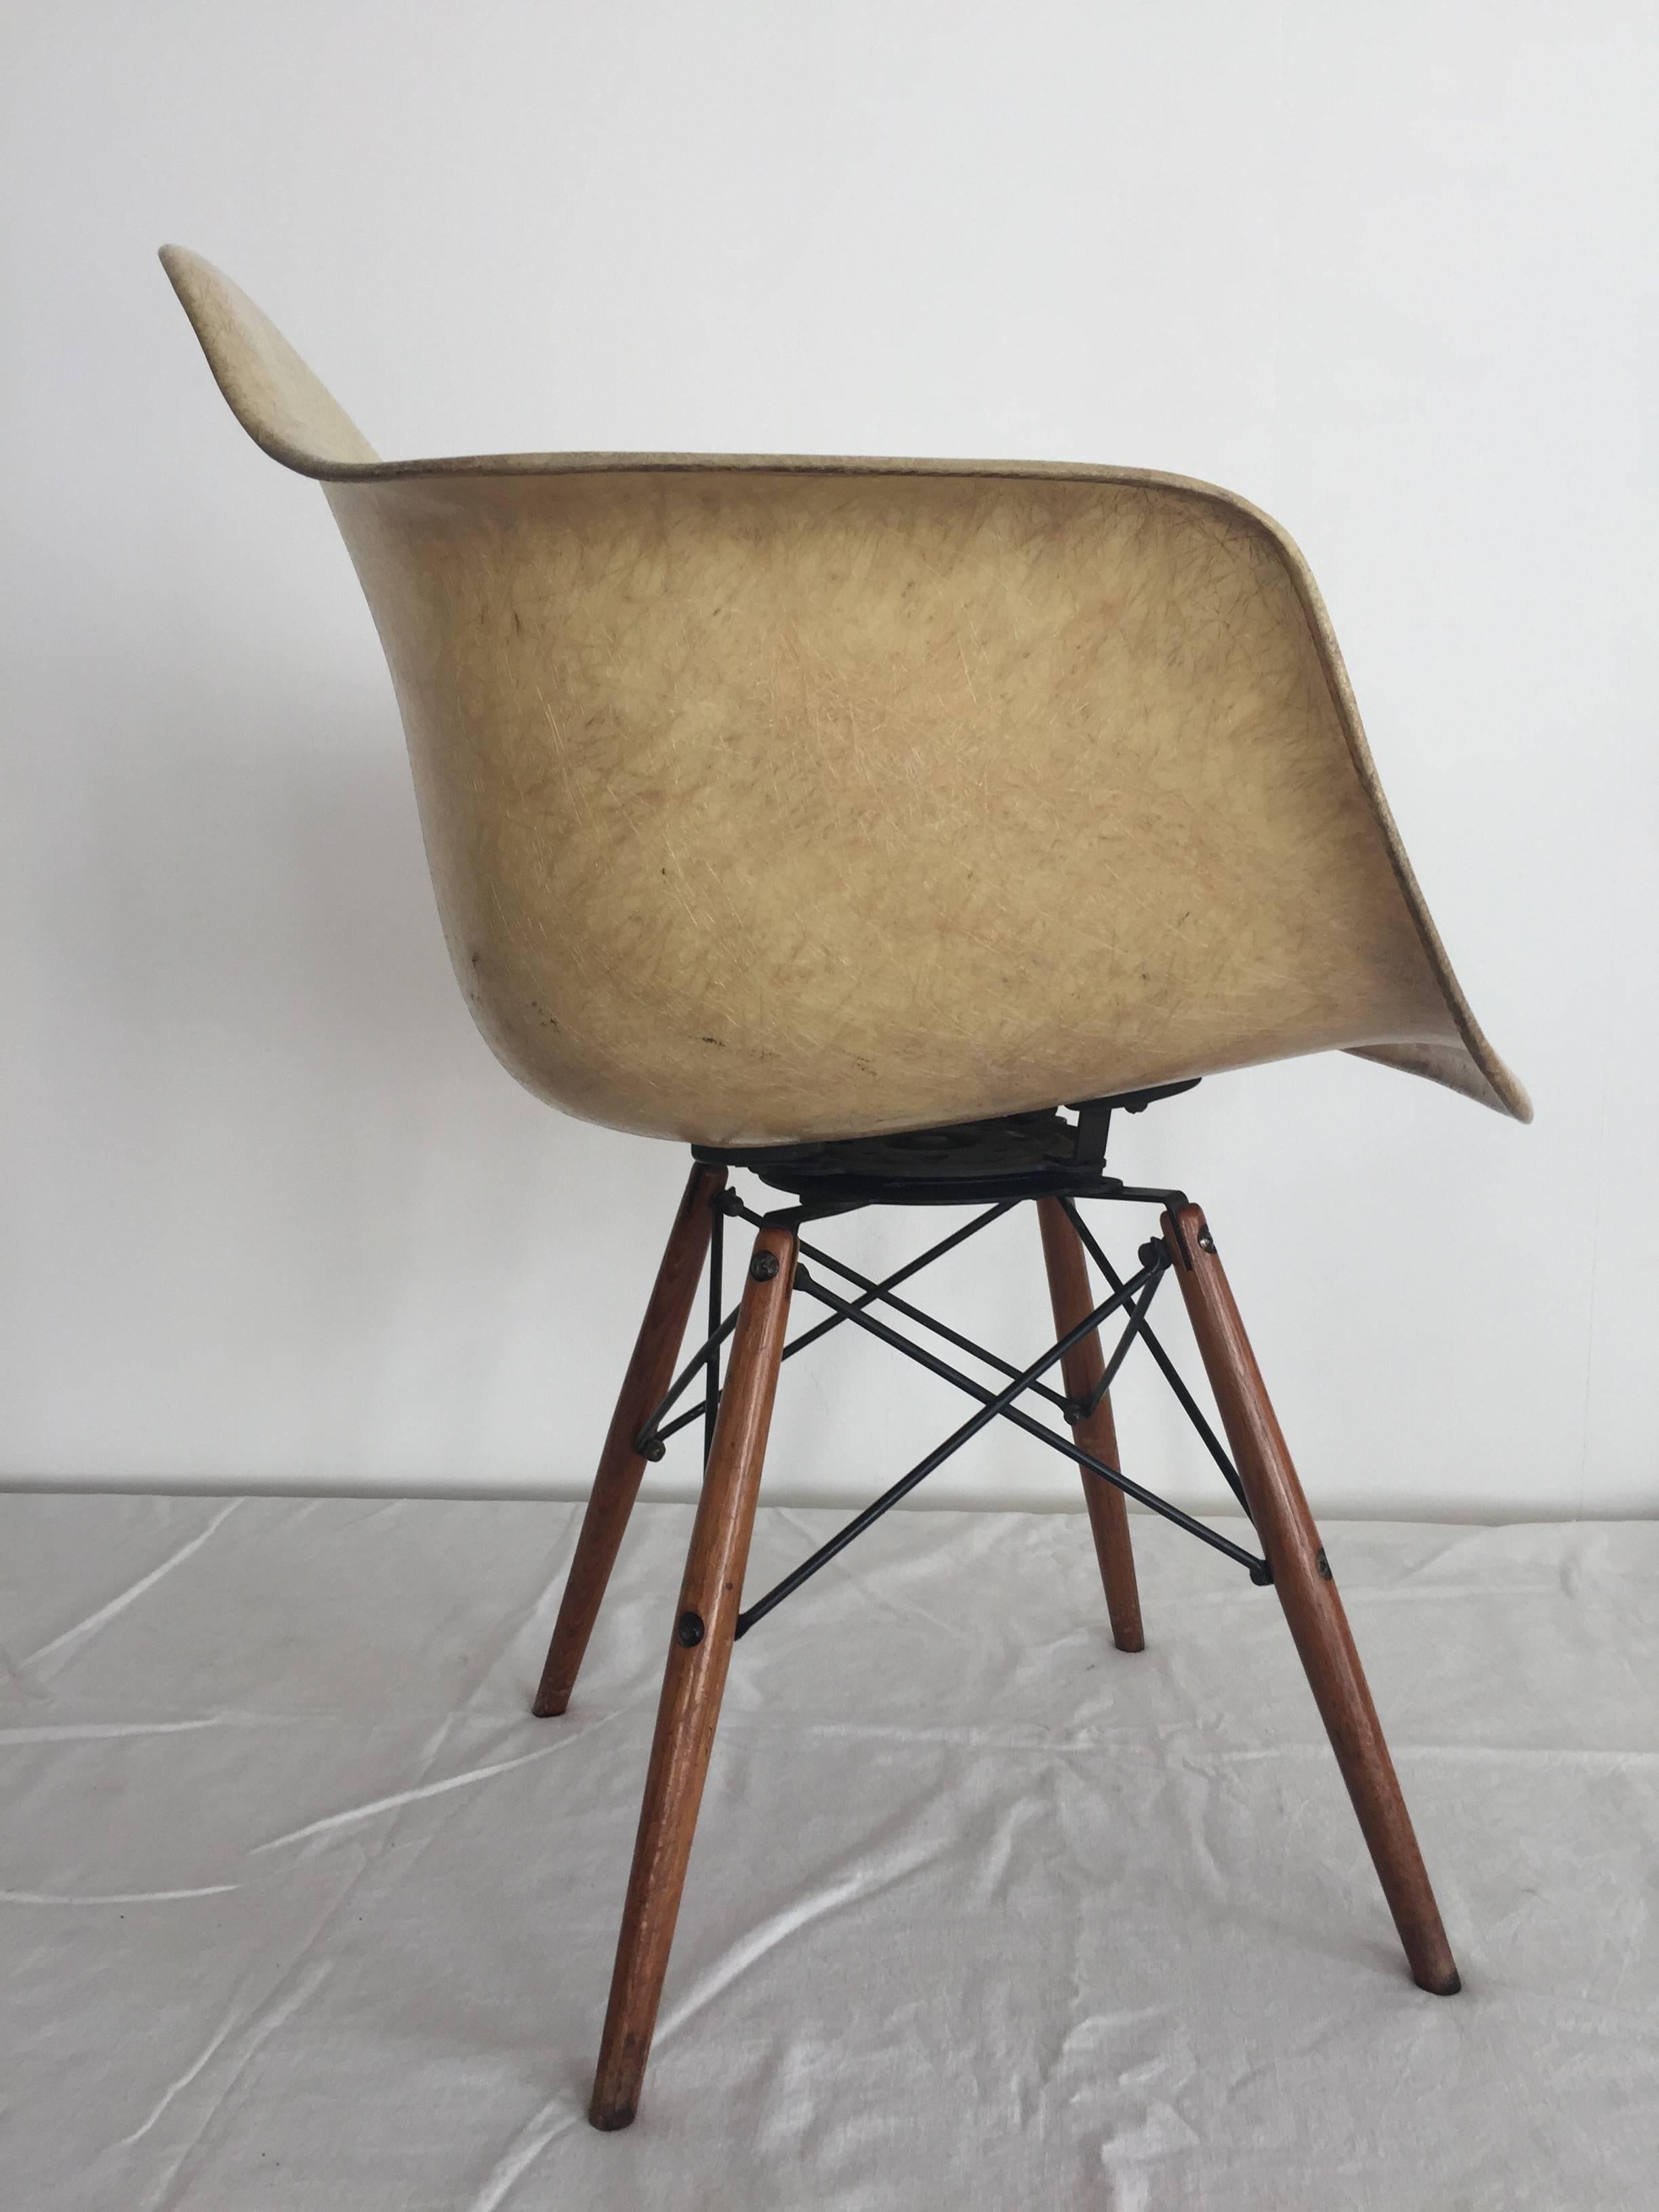 First production, first generation 1949-1950 Zenith Herman Miller, Charles Eames PAW rope swivel chair in color grey elephant, dowel legs in birch / all original parts. The awesome dowel base reads Seng Chicago on the metal portion, fiberglass shell